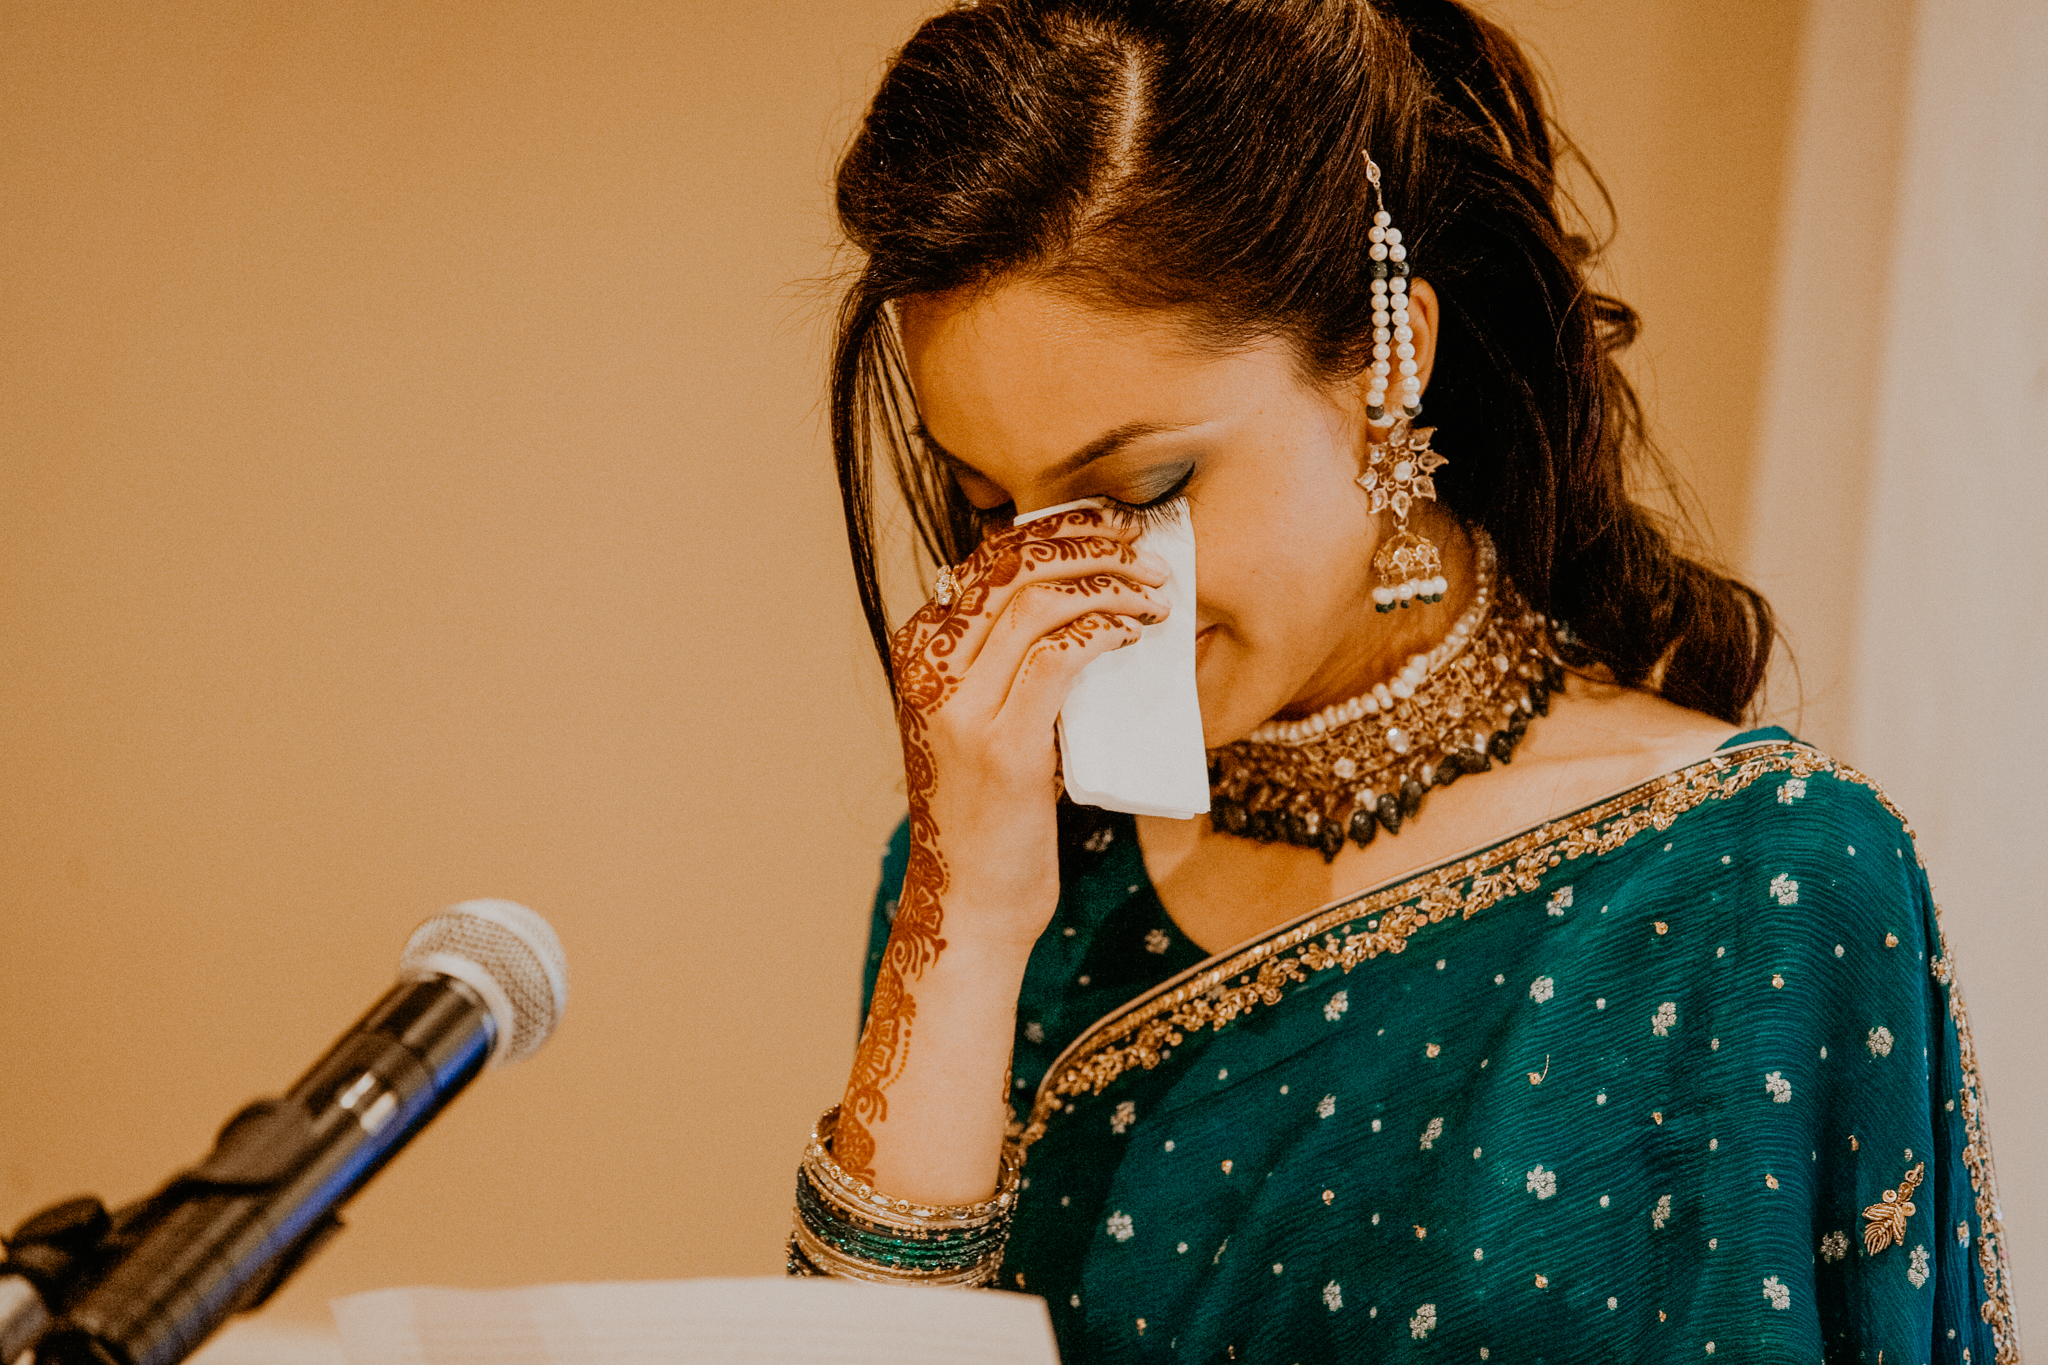 Sister of bride makes speech at Indian wedding